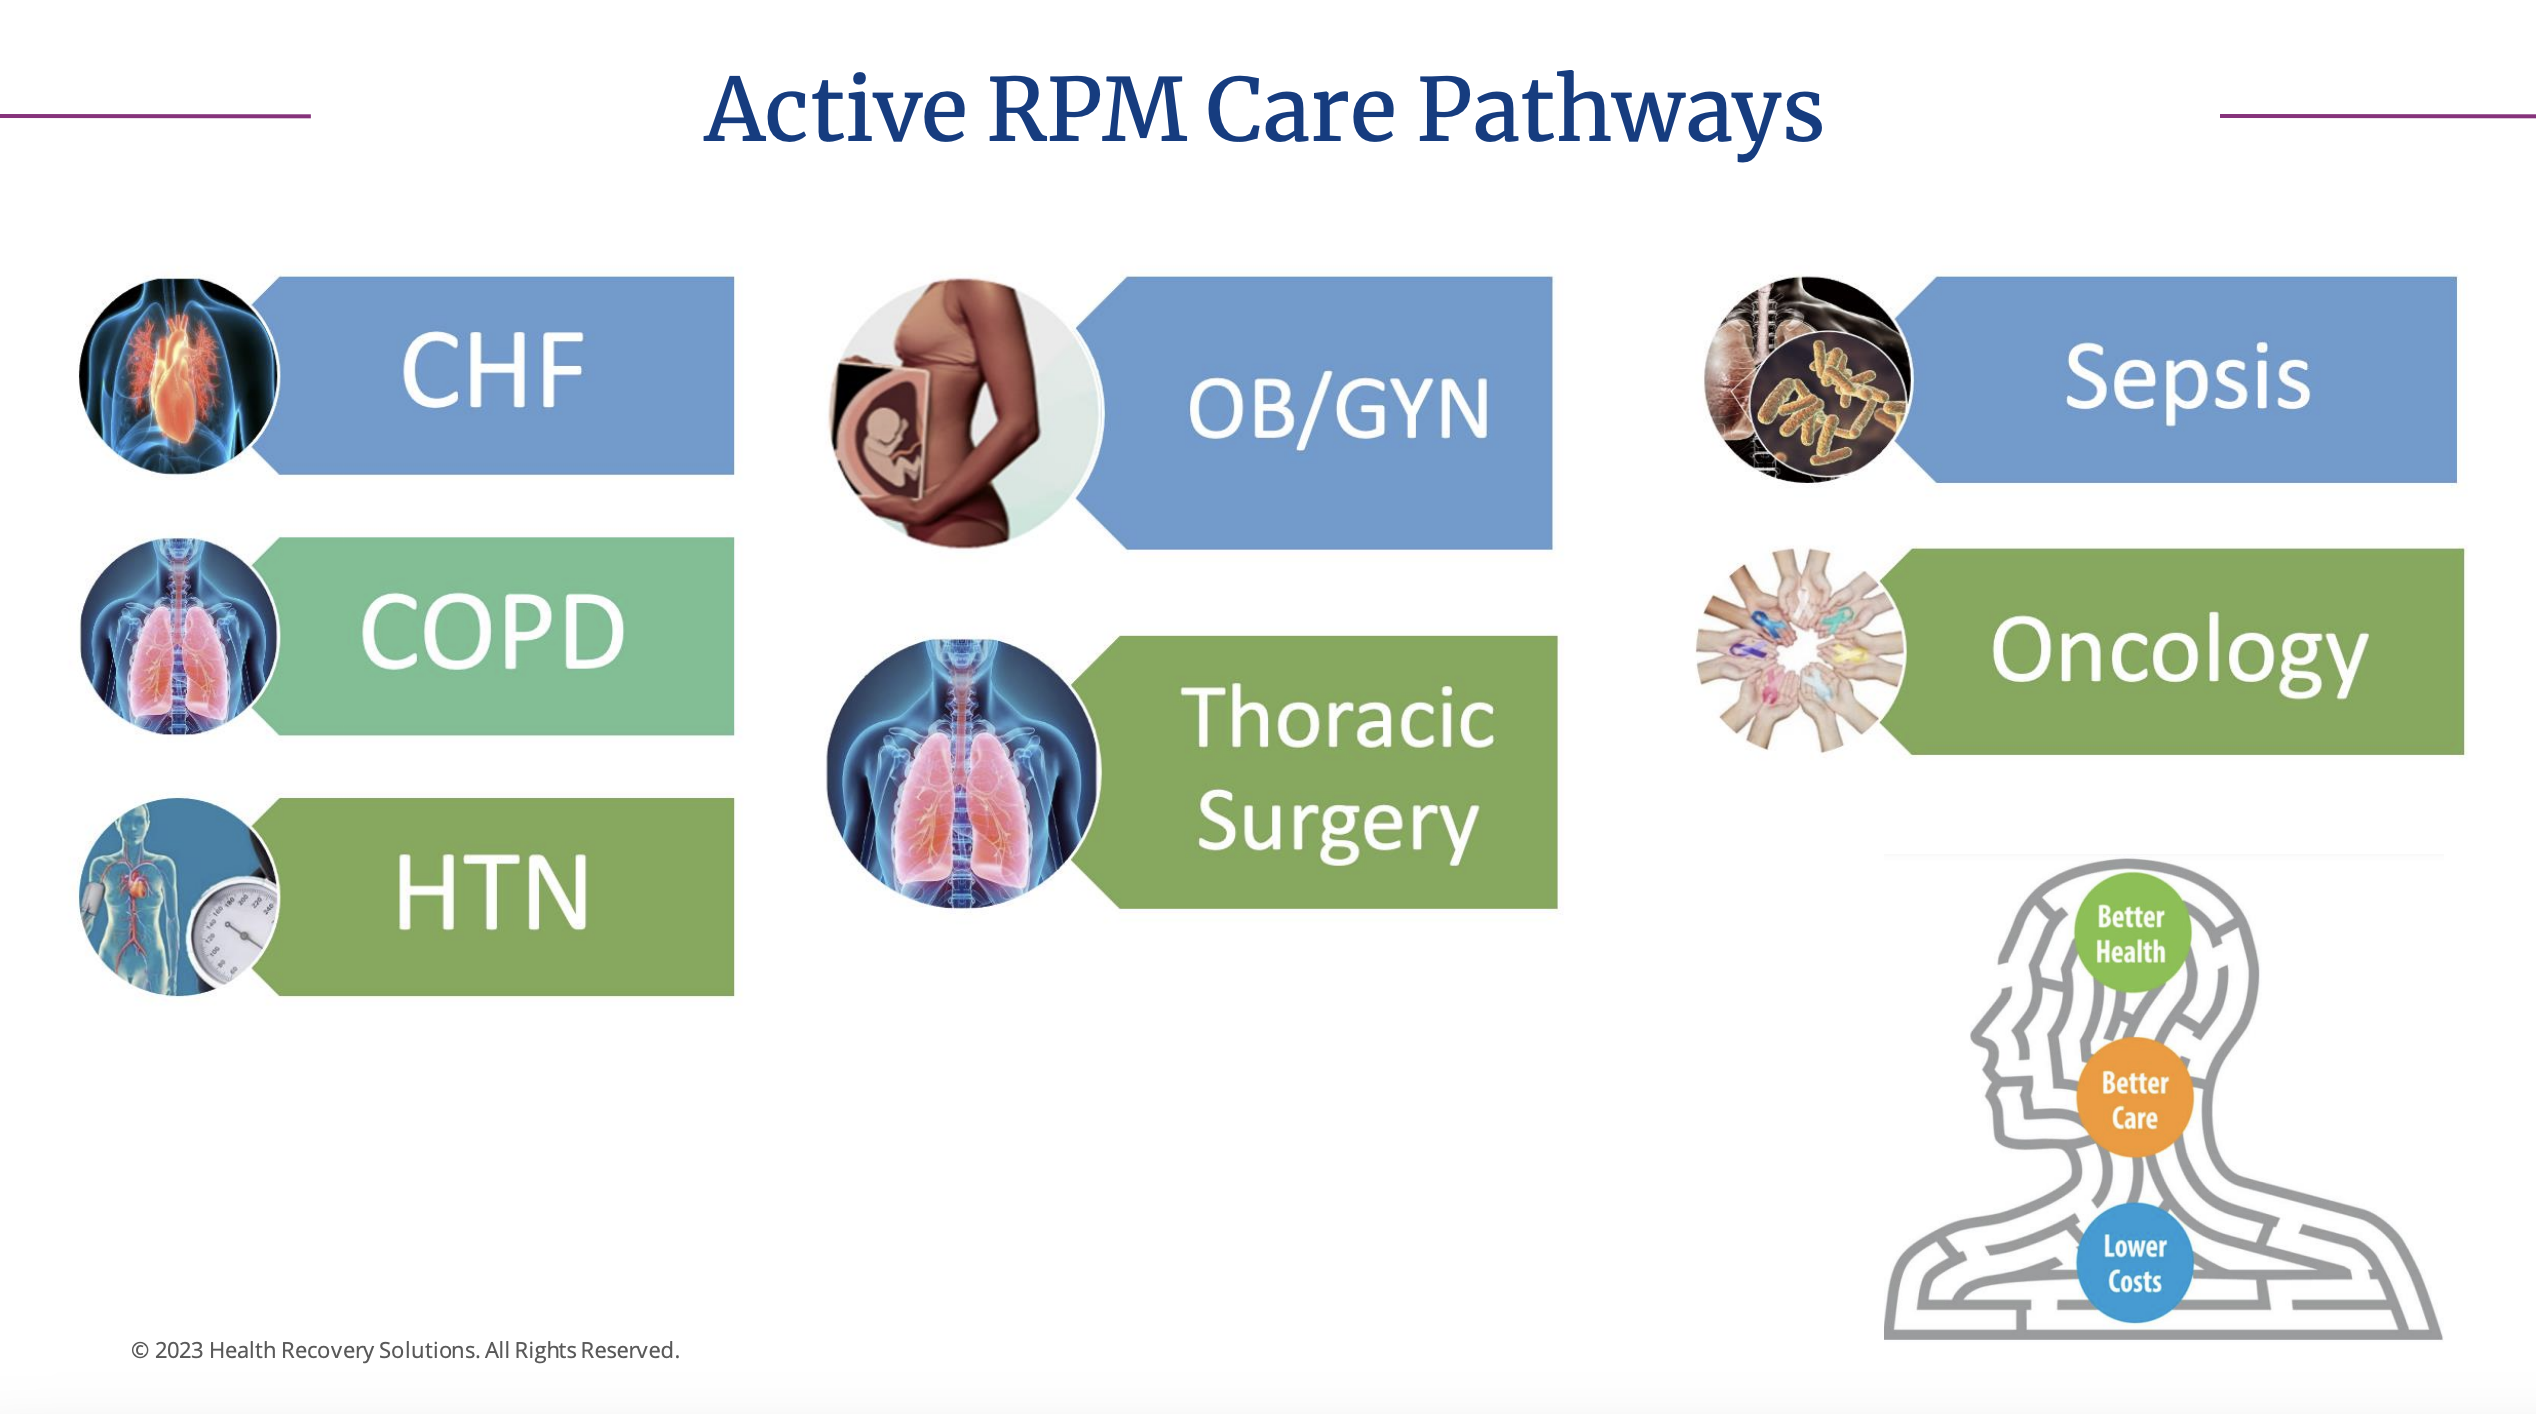 A slide from the webinar presentation shows the active RPM care pathways Lee Health currently supports